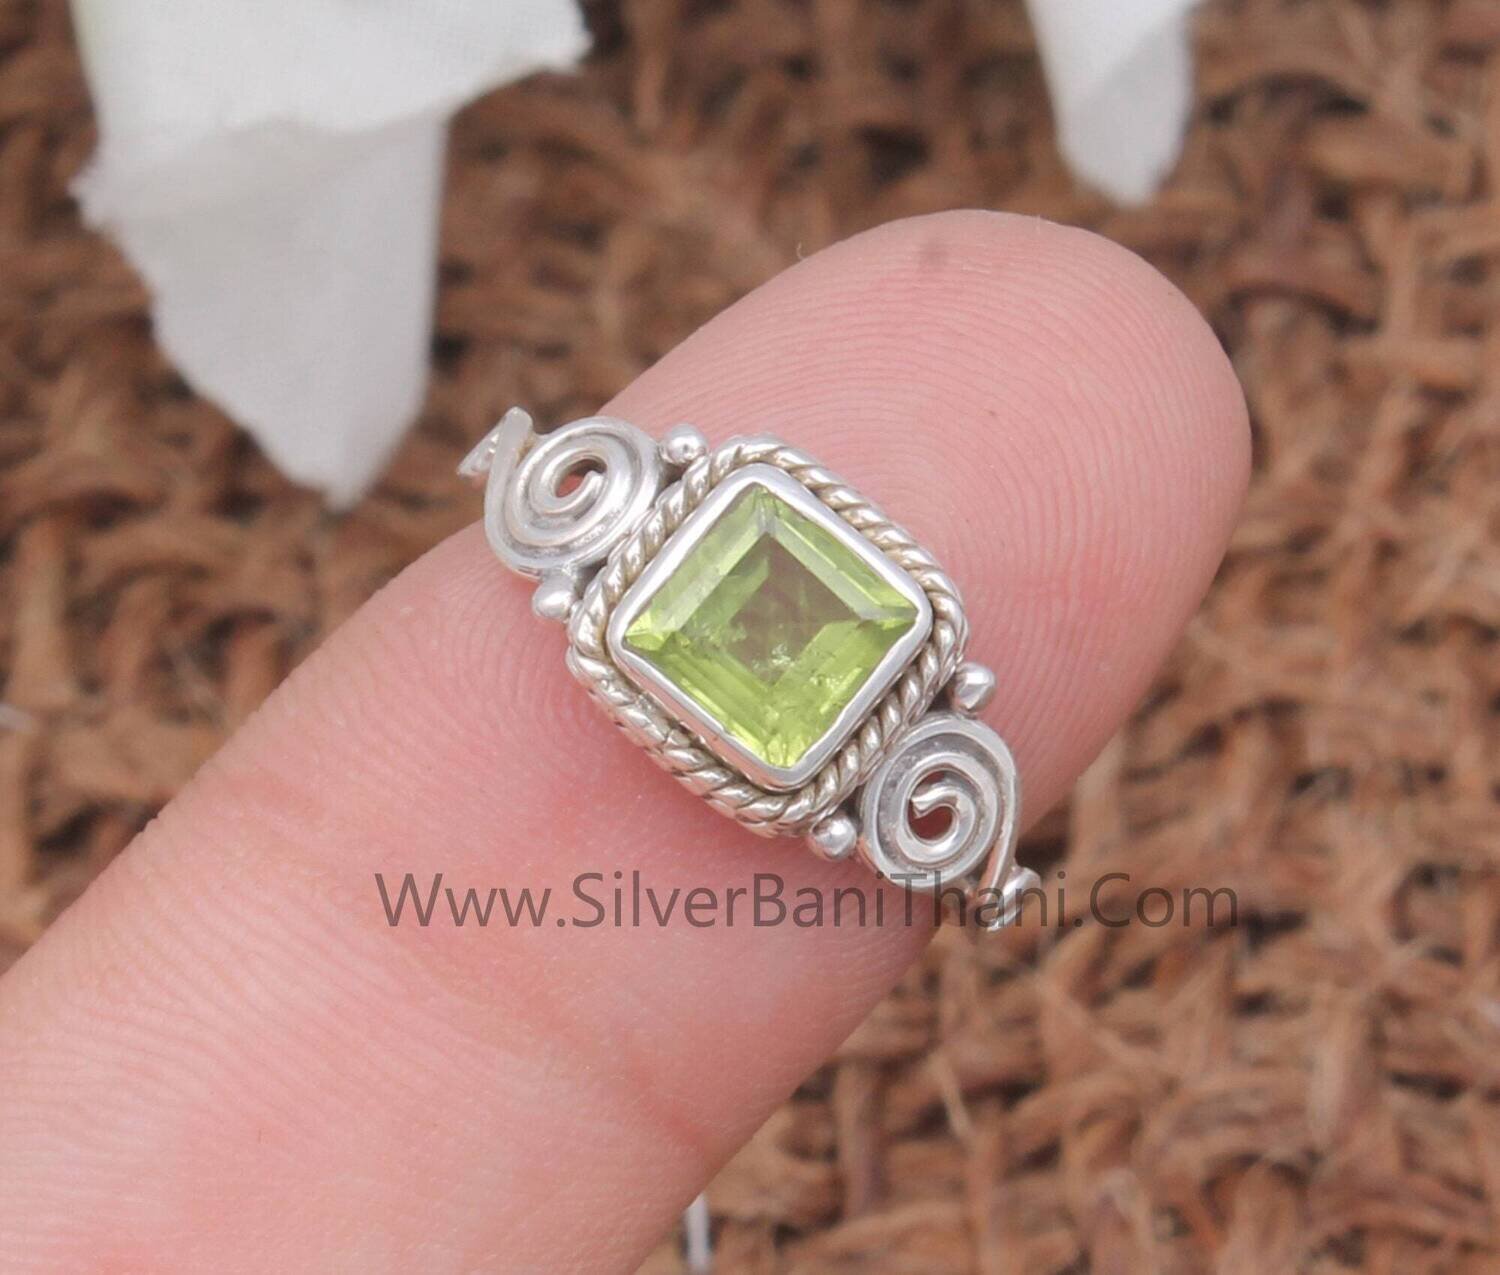 Peridot Gemstone Silver Ring | 925 Sterling Silver Squire Cut Gemstone Ring | Designer Handmade Women Silver Jewelry For Gift idea